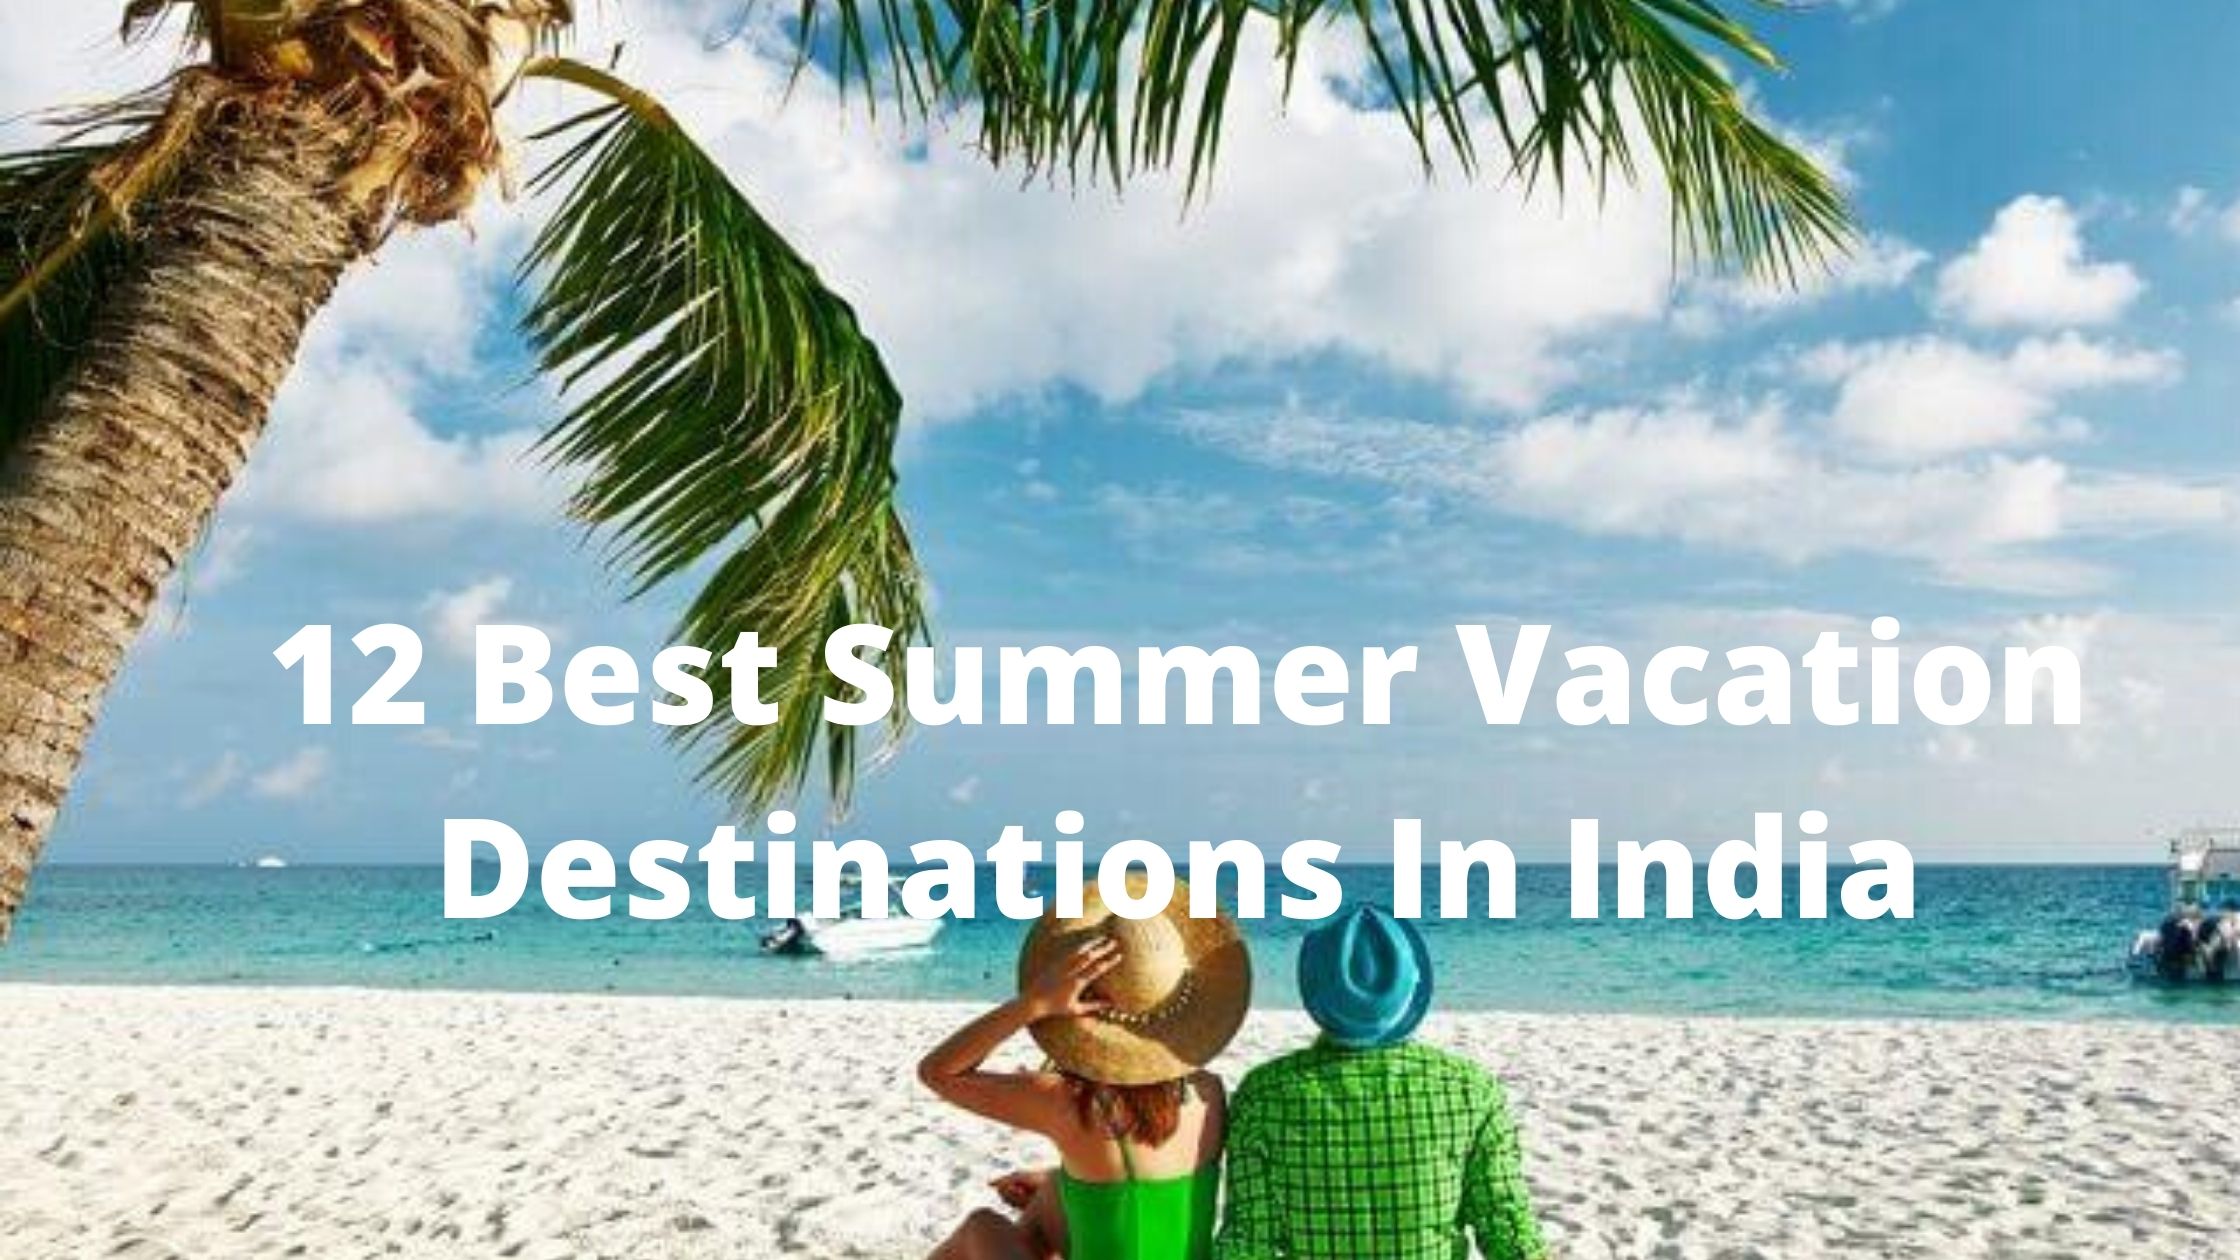 12 Best Summer Vacation Destinations In India